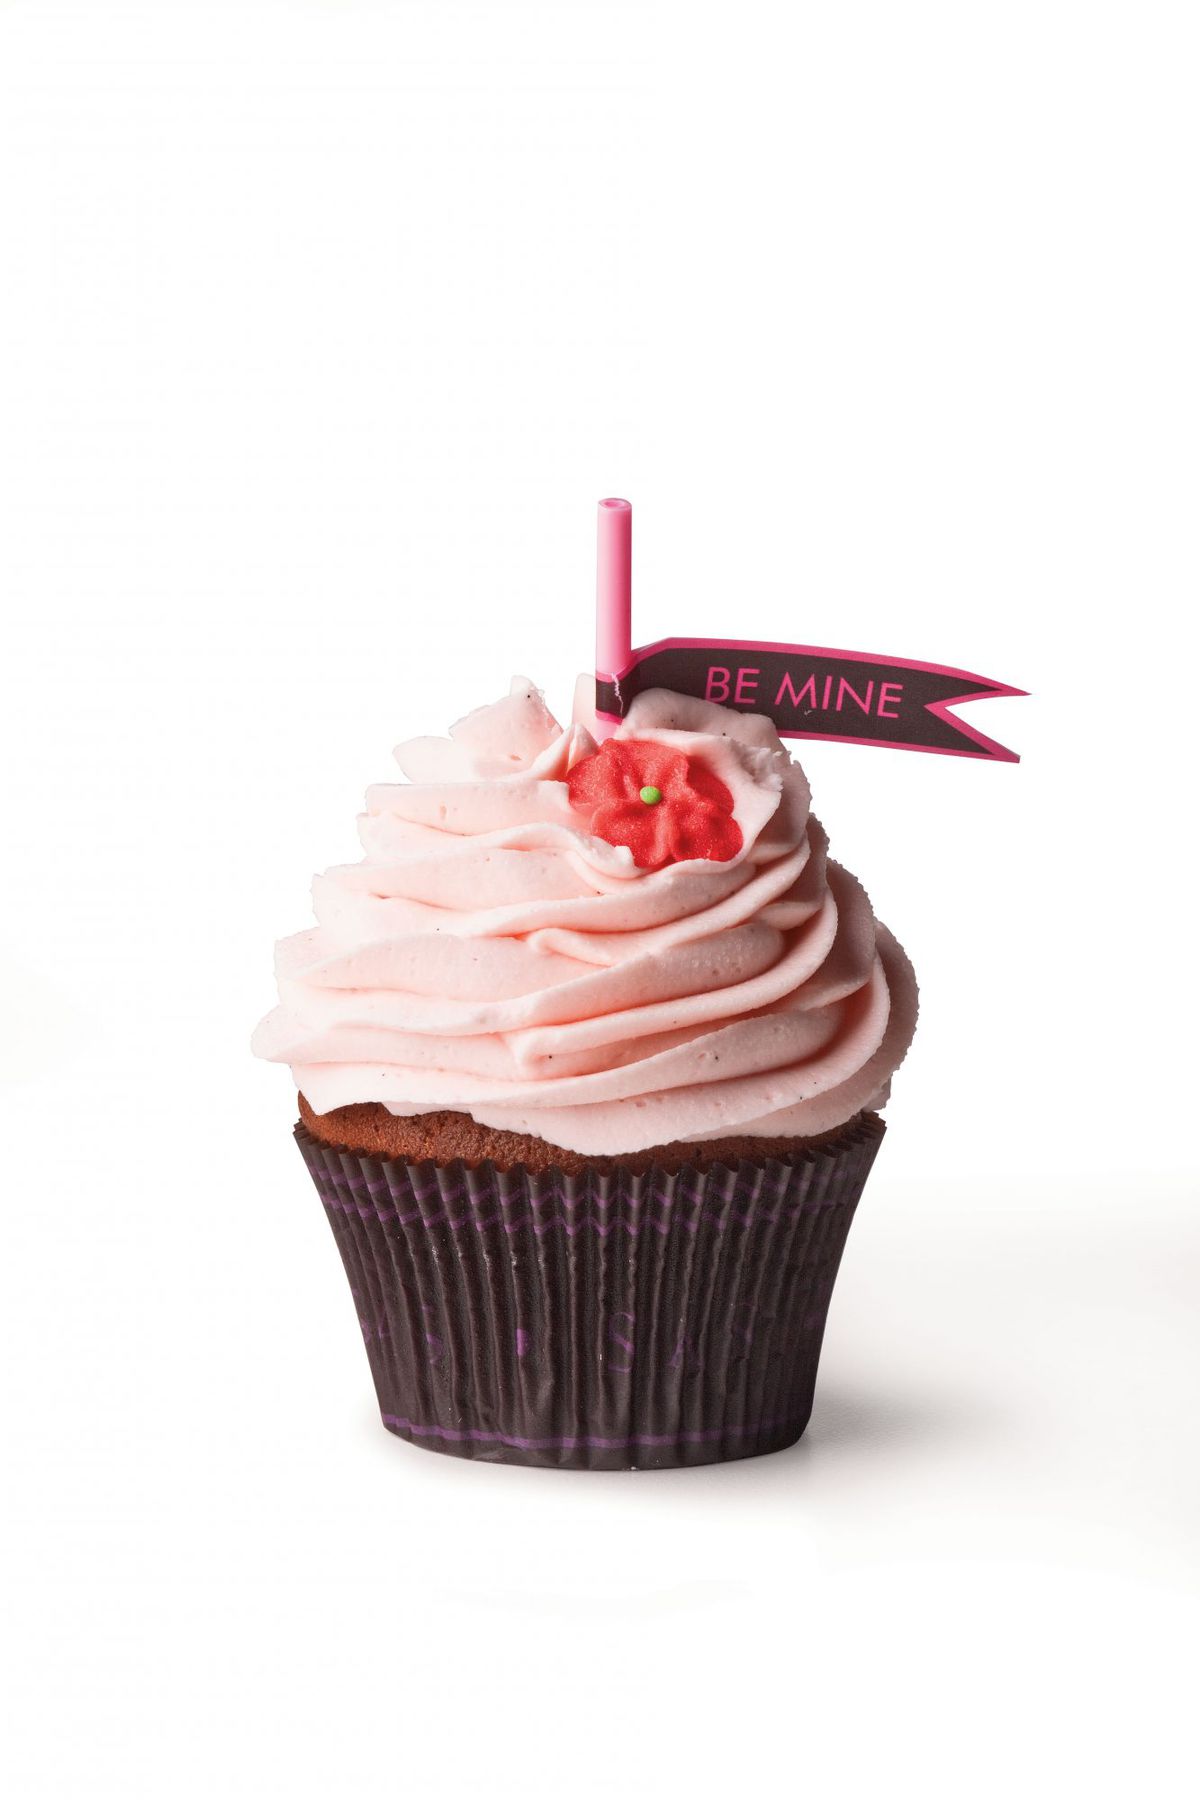 Classic Cupcakes with Mile-High Pink Frosting